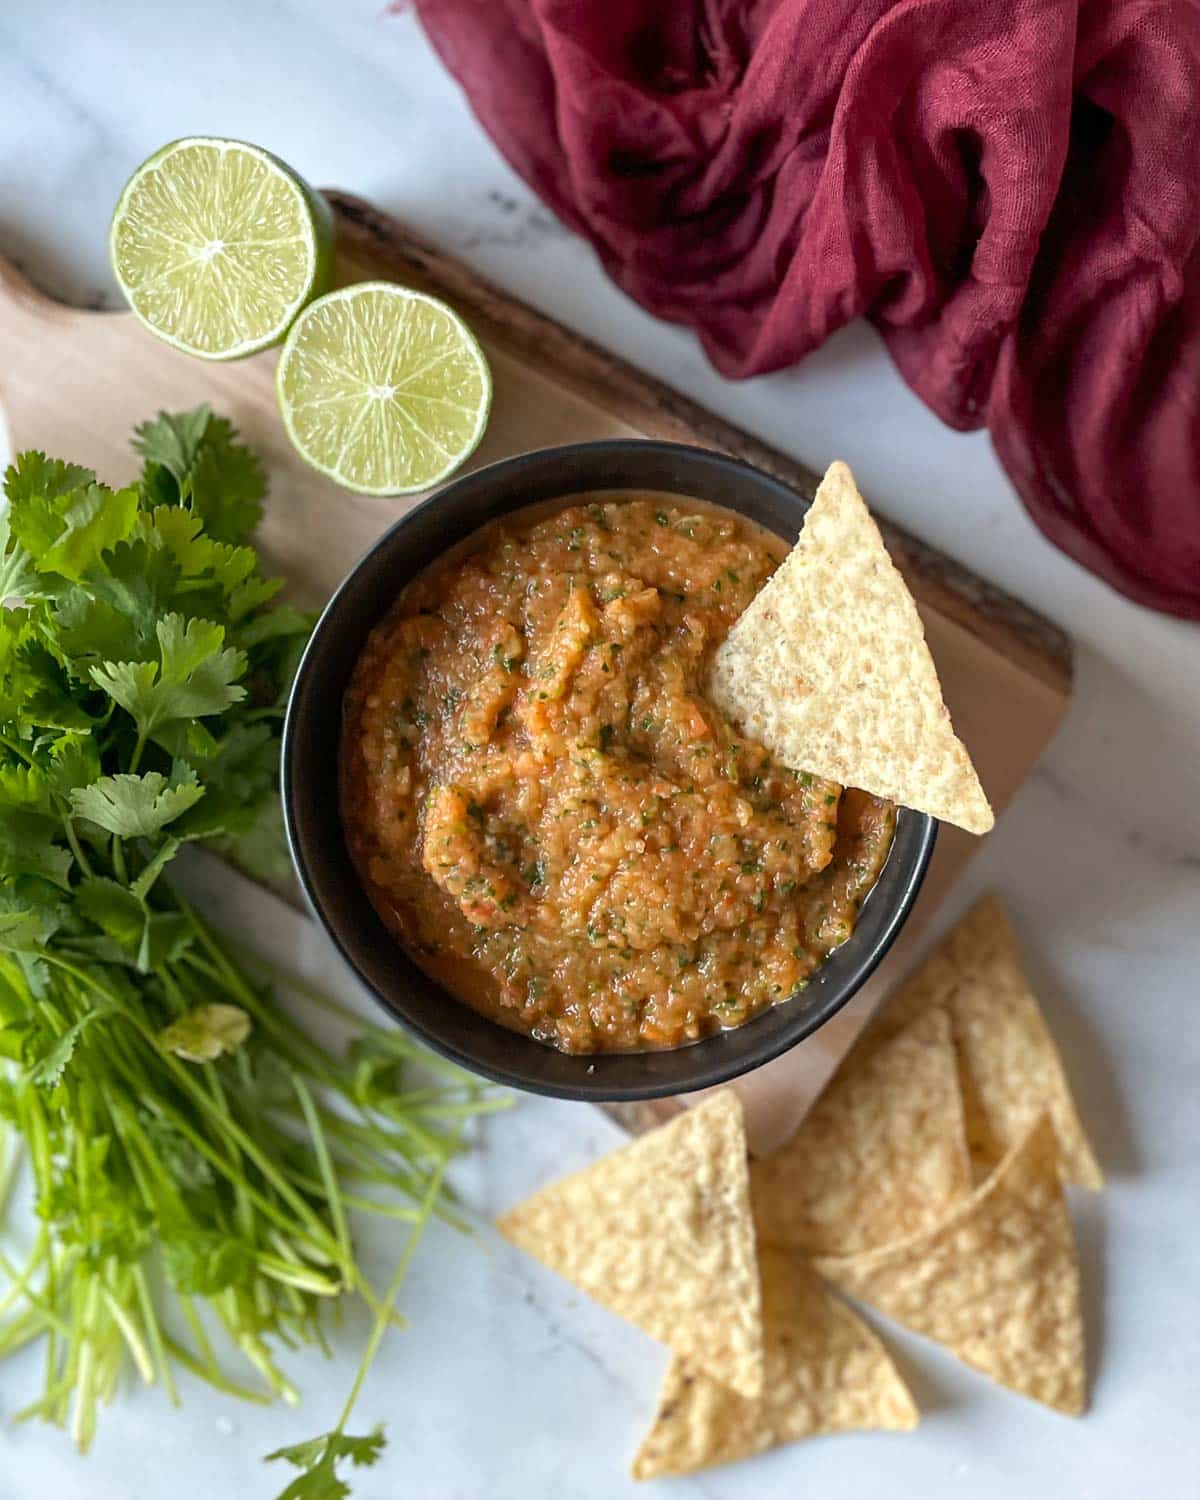 A bowl of pineapple habanero salsa sits on a rustic wooden cutting board surrounded by limes, cilantro, and tortilla chips.